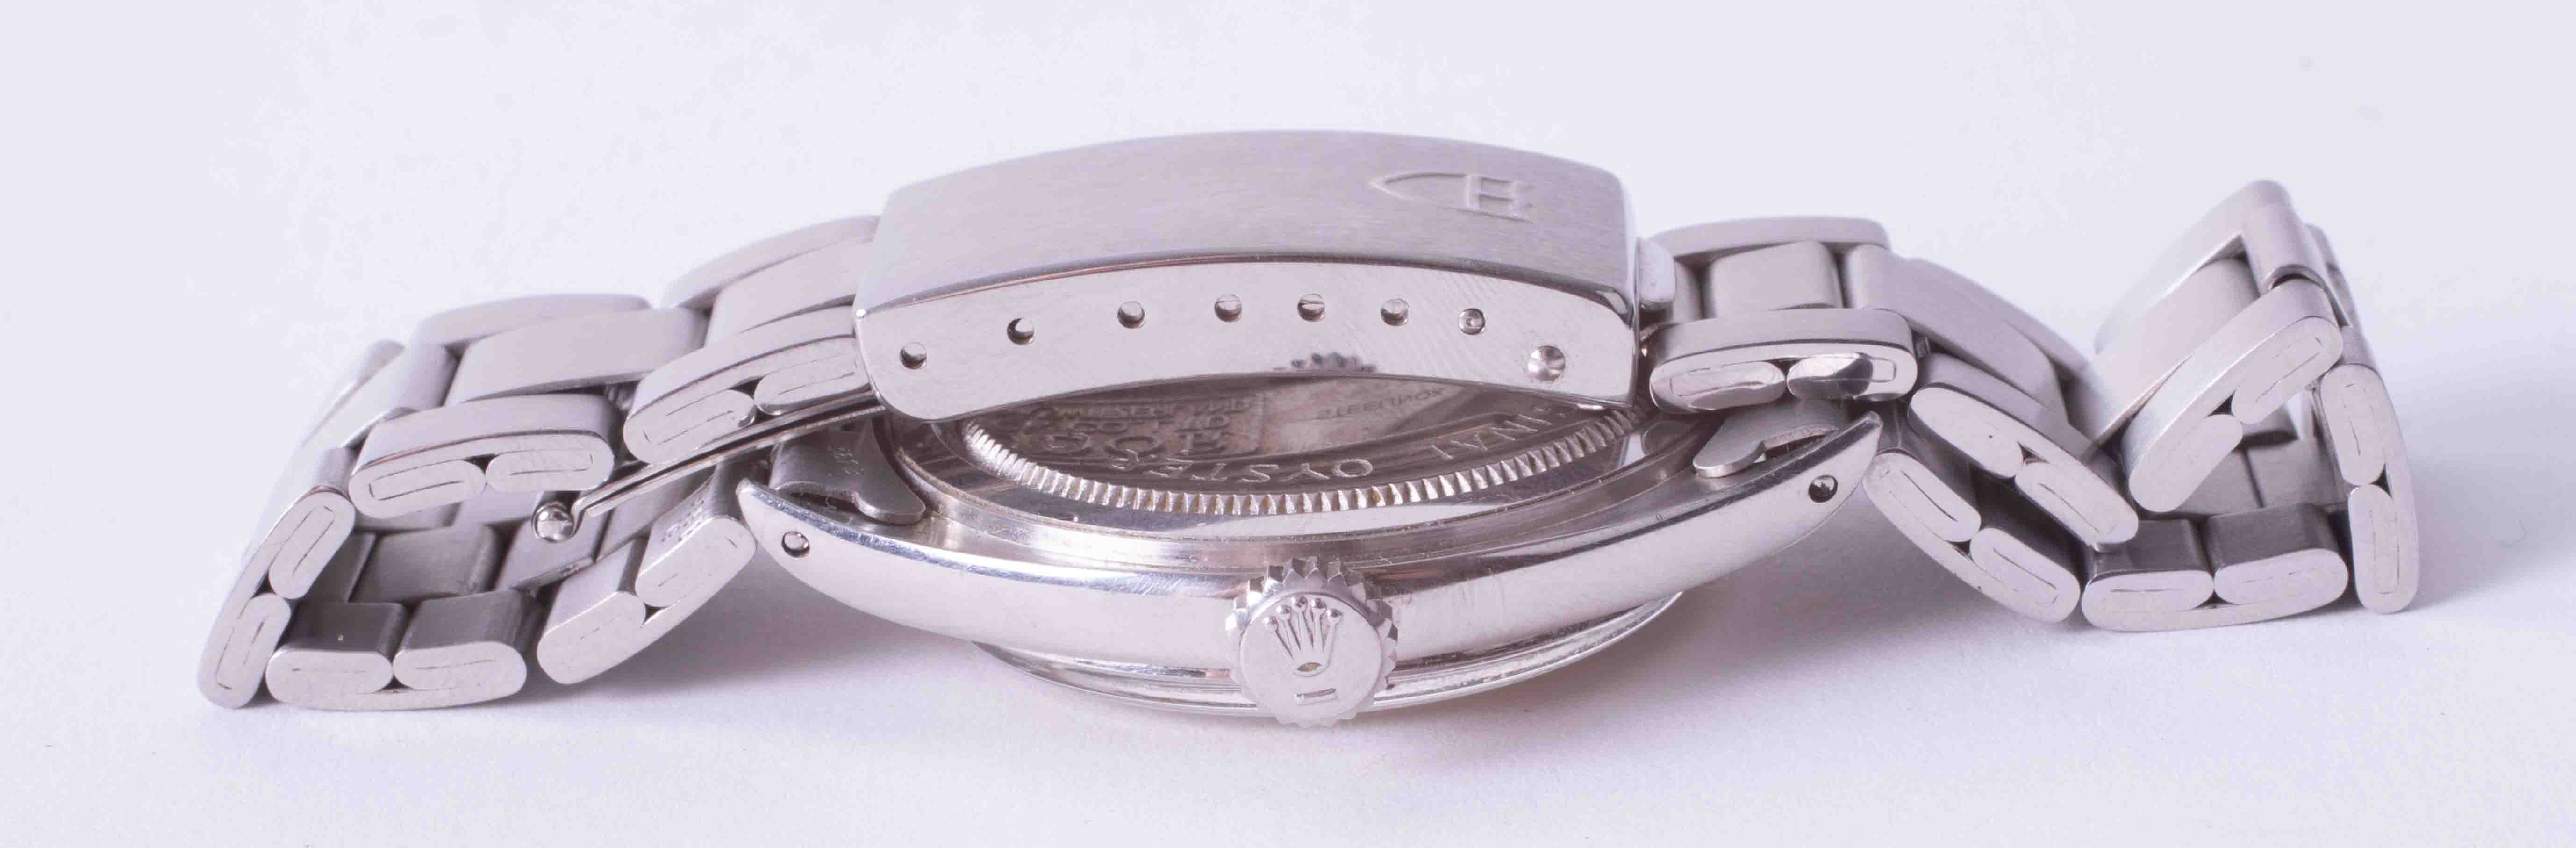 Tudor, Oyster Royal gent's manual wind shock resistant stainless steel wristwatch, 1958/1960, - Image 3 of 5